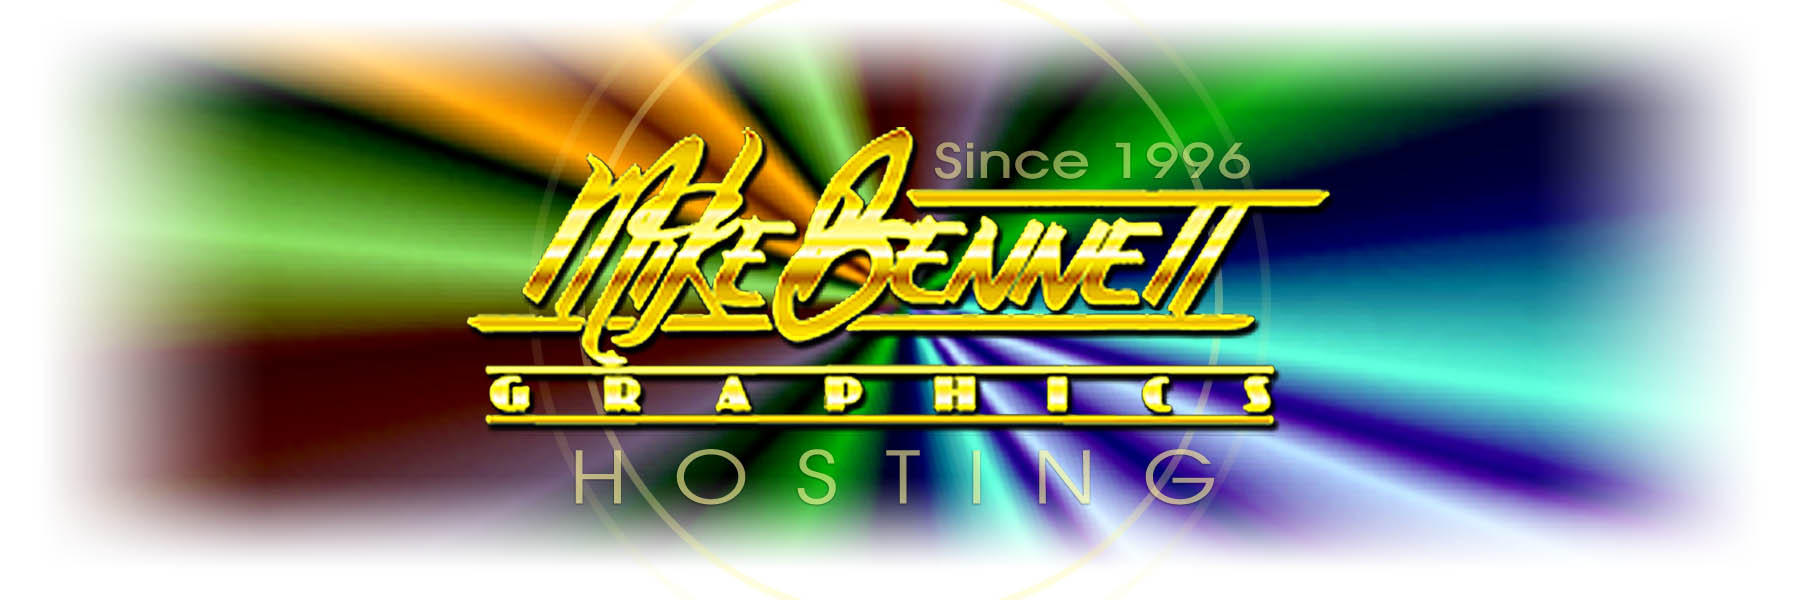 MBGRAPHICS HOSTING - Internet Services from Mike Bennett Graphics